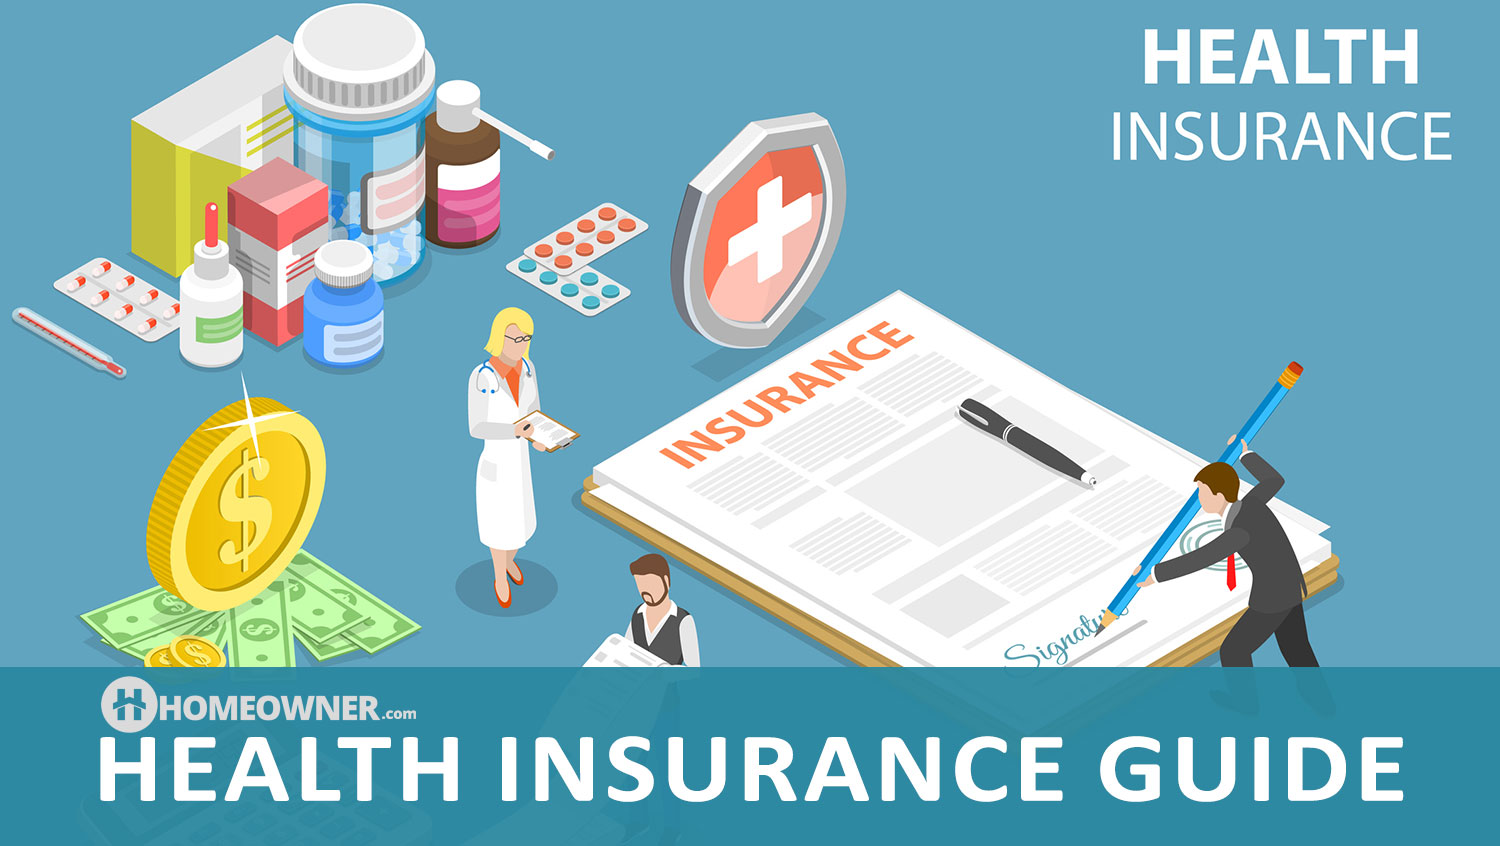 Medical Insurance Guide: 7 Types of Health Insurance Plans